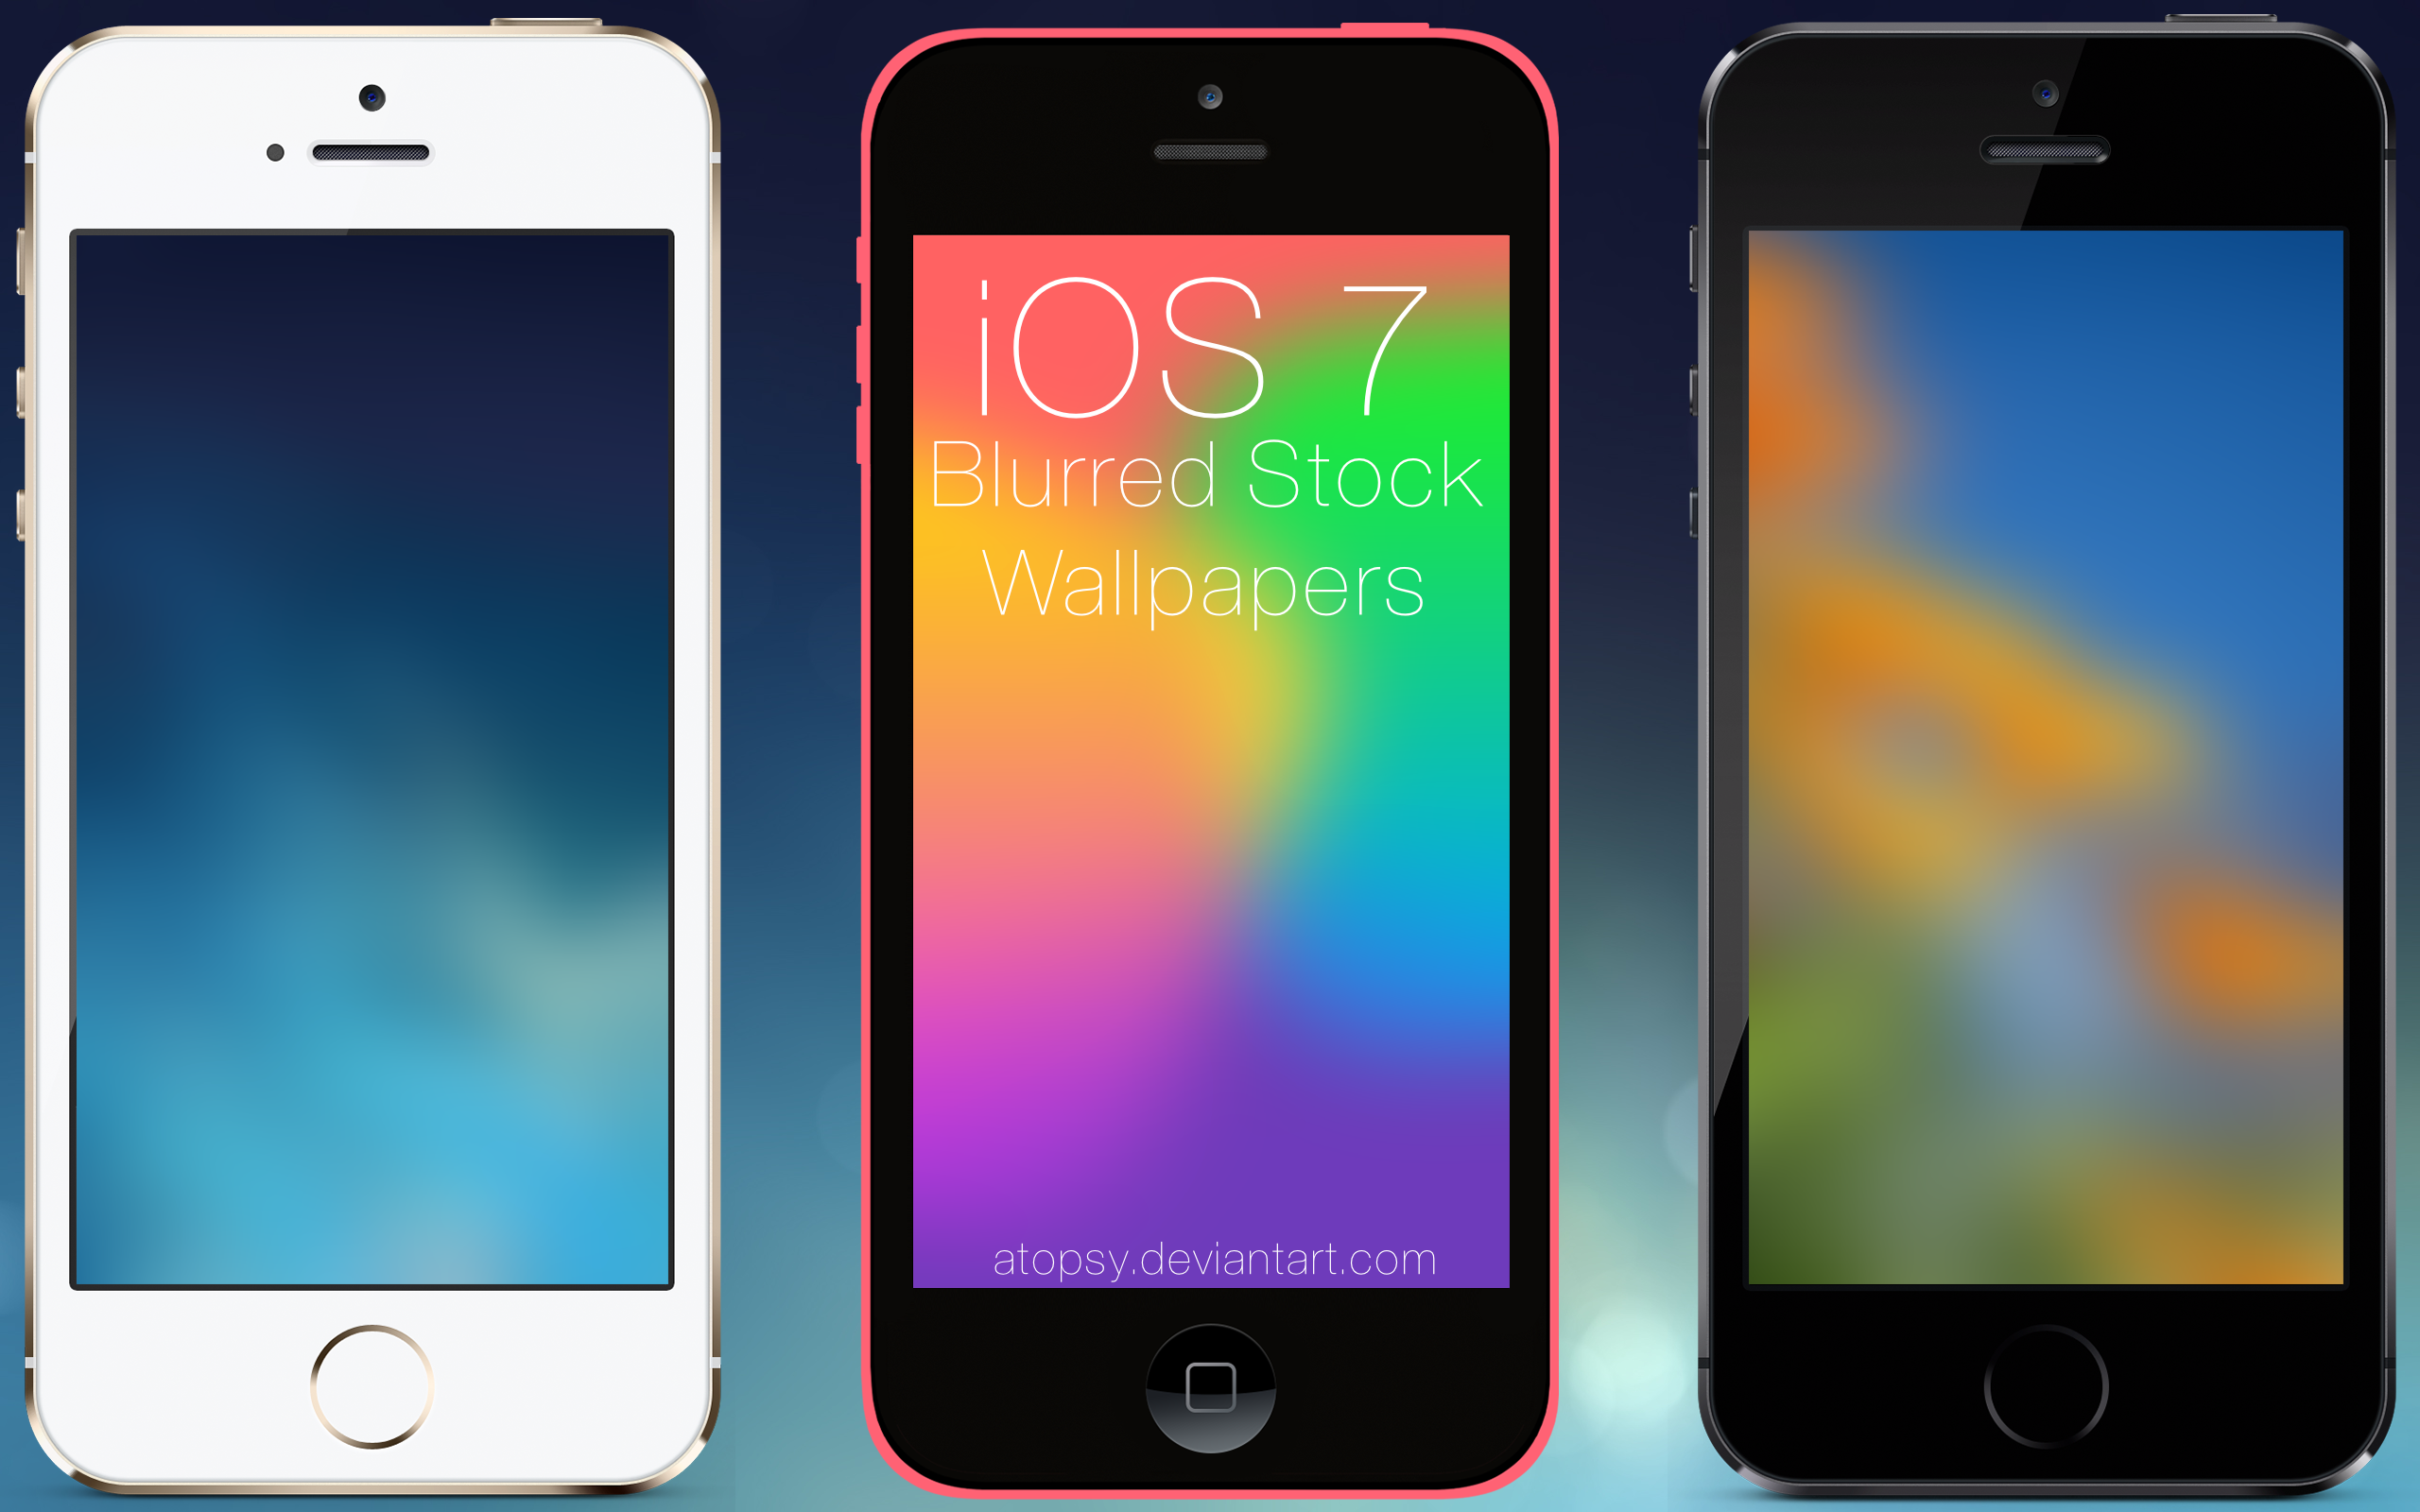 Blurred Wallpapers Iphone Ipod Touch 5 5s 5c By Atopsy On Deviantart